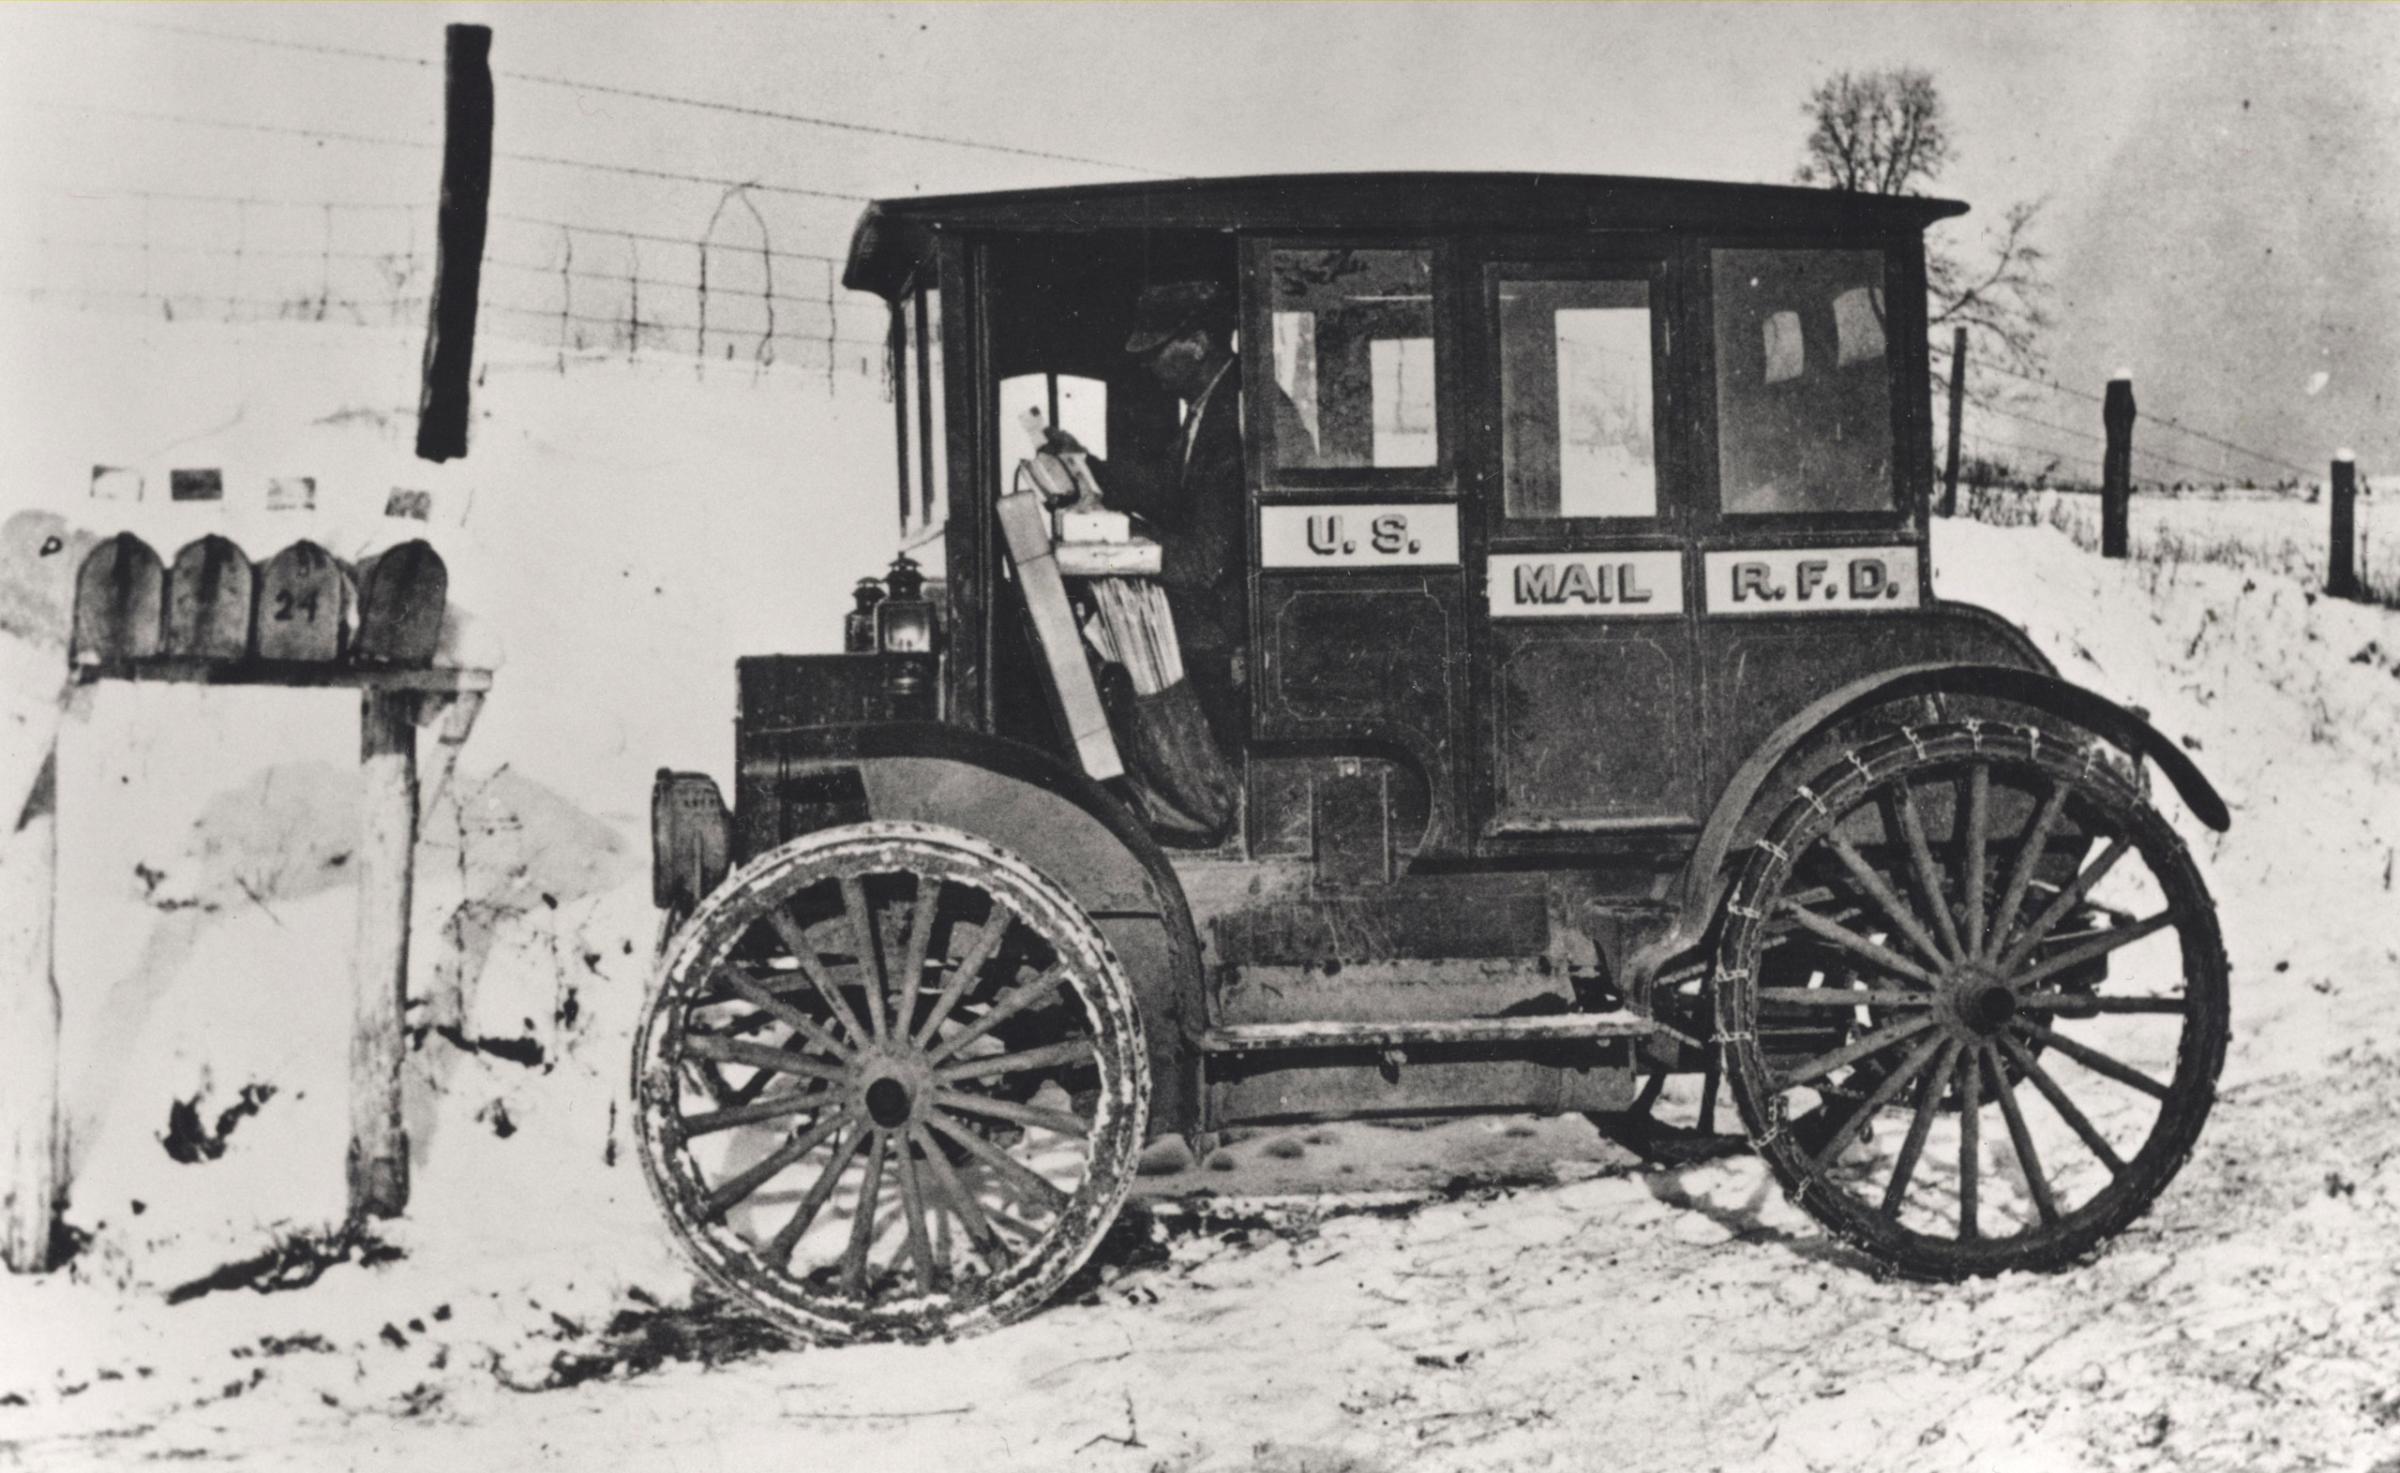 Postal officials encouraged Rural Free Delivery (RFD) carriers to replace their horses and wagons with the latest in transportation technology. This unidentified carrier painted his early electric-motored vehicle in the same paint and identification scheme as the RFD wagons of the era. He is, no doubt, only able to complete his wintertime rounds thanks to a snow-plowed road. Automobiles were not yet adequate replacements for horses, wagons, and sleds on rural roads. 1910.